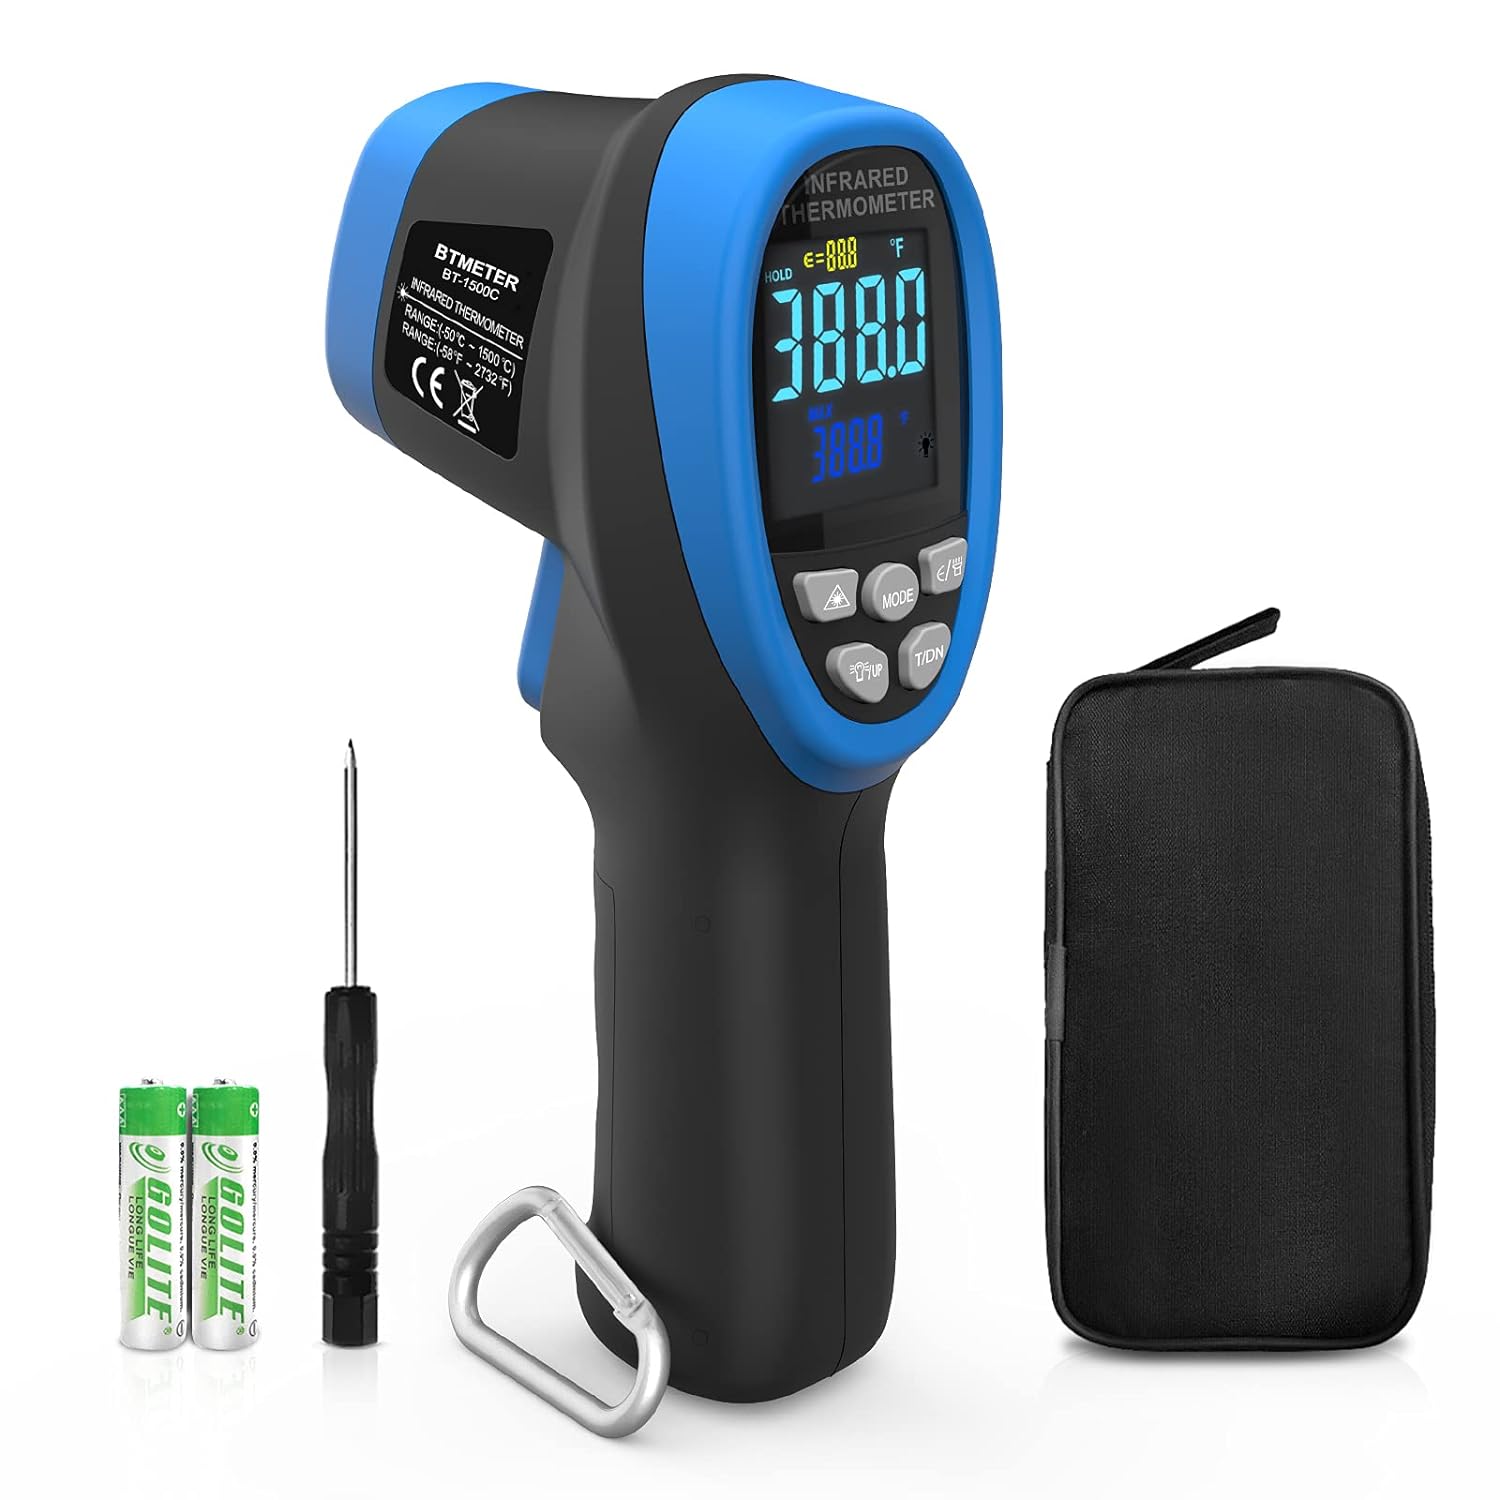 Infrared Thermometer LCD Laser Temperature Gun Non-contact Digital Meter ℉/ ℃ 